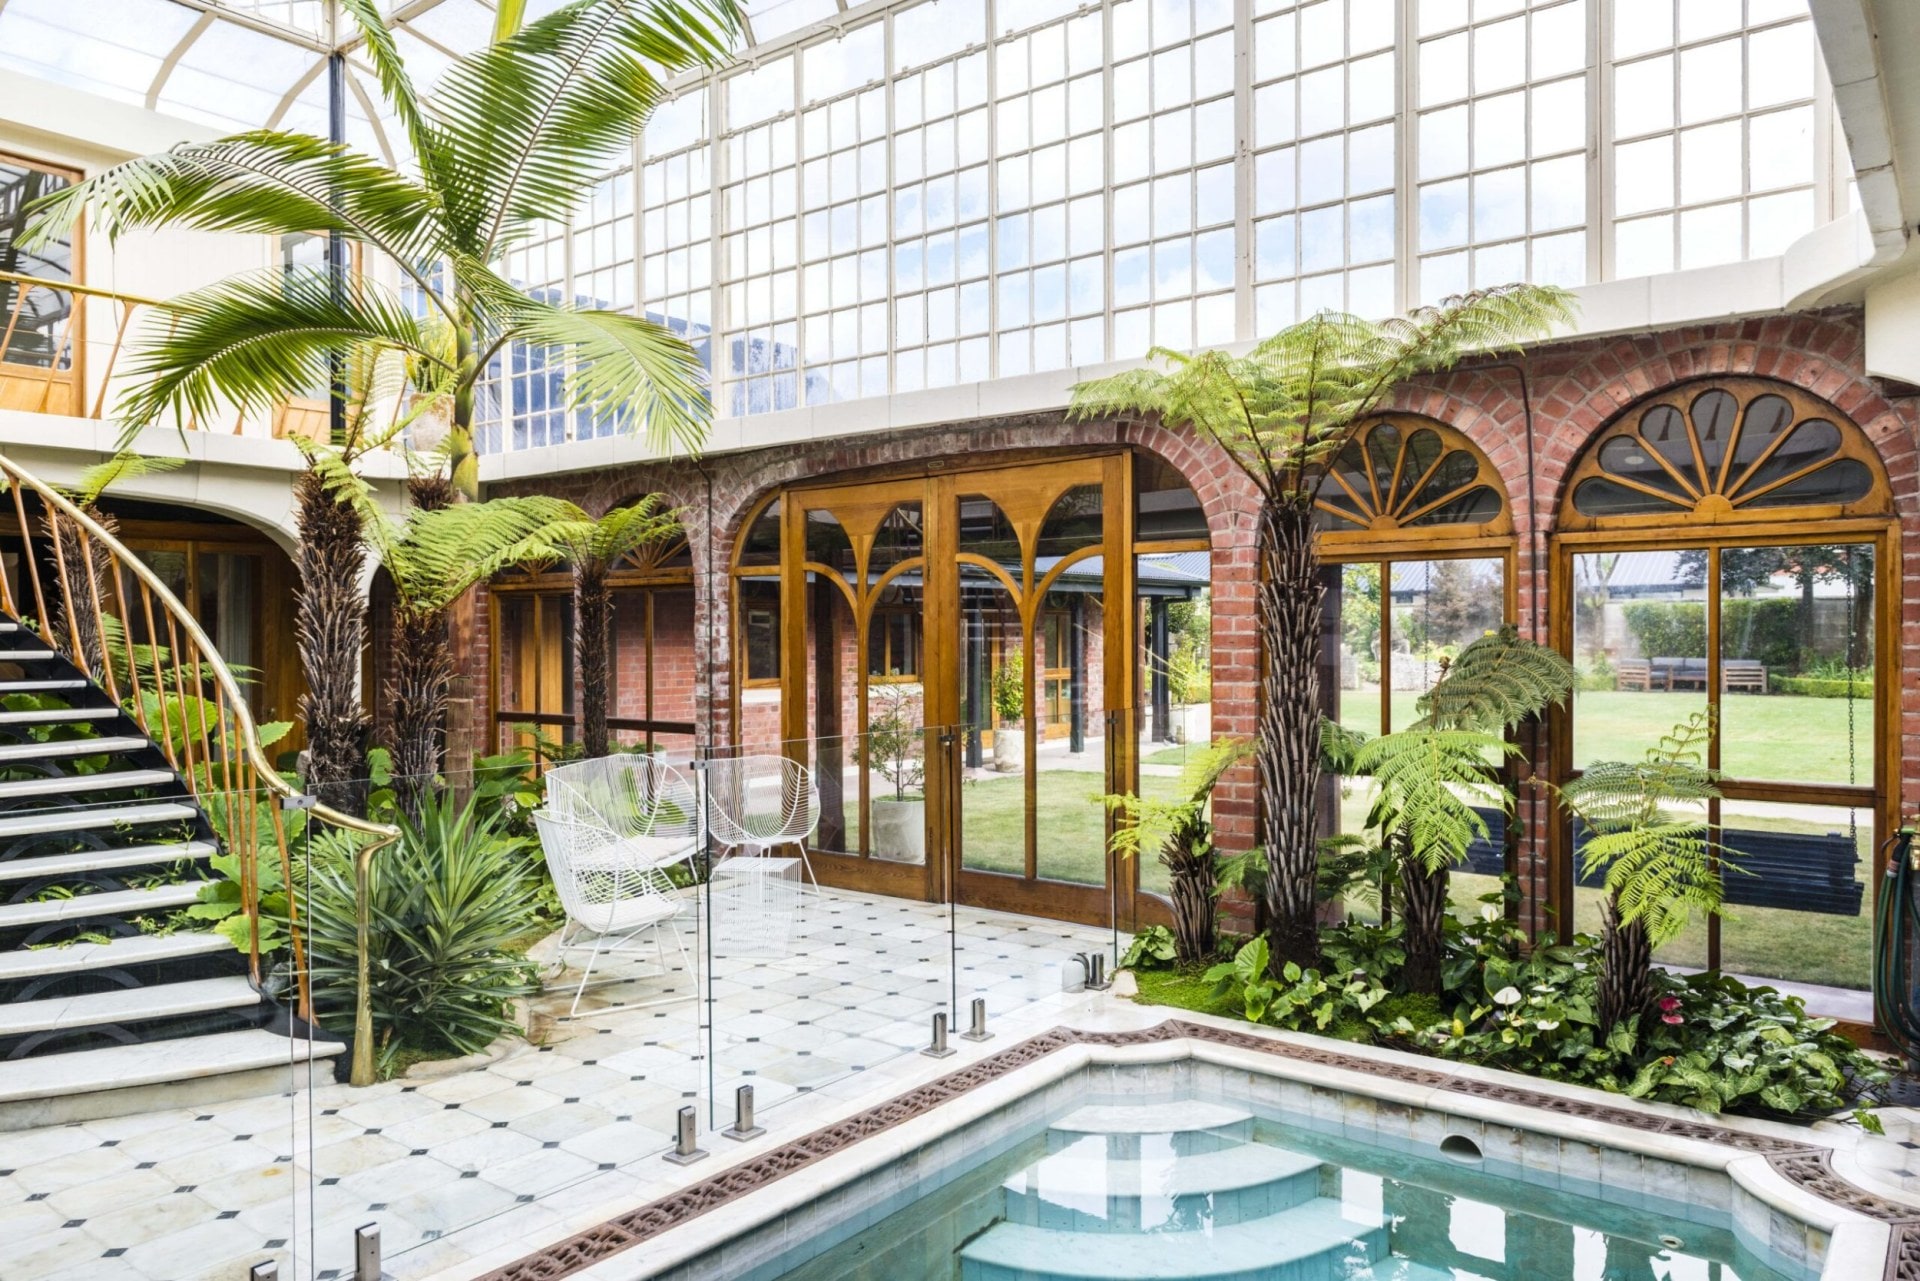 A large conservatory with arched windows and a blue pool